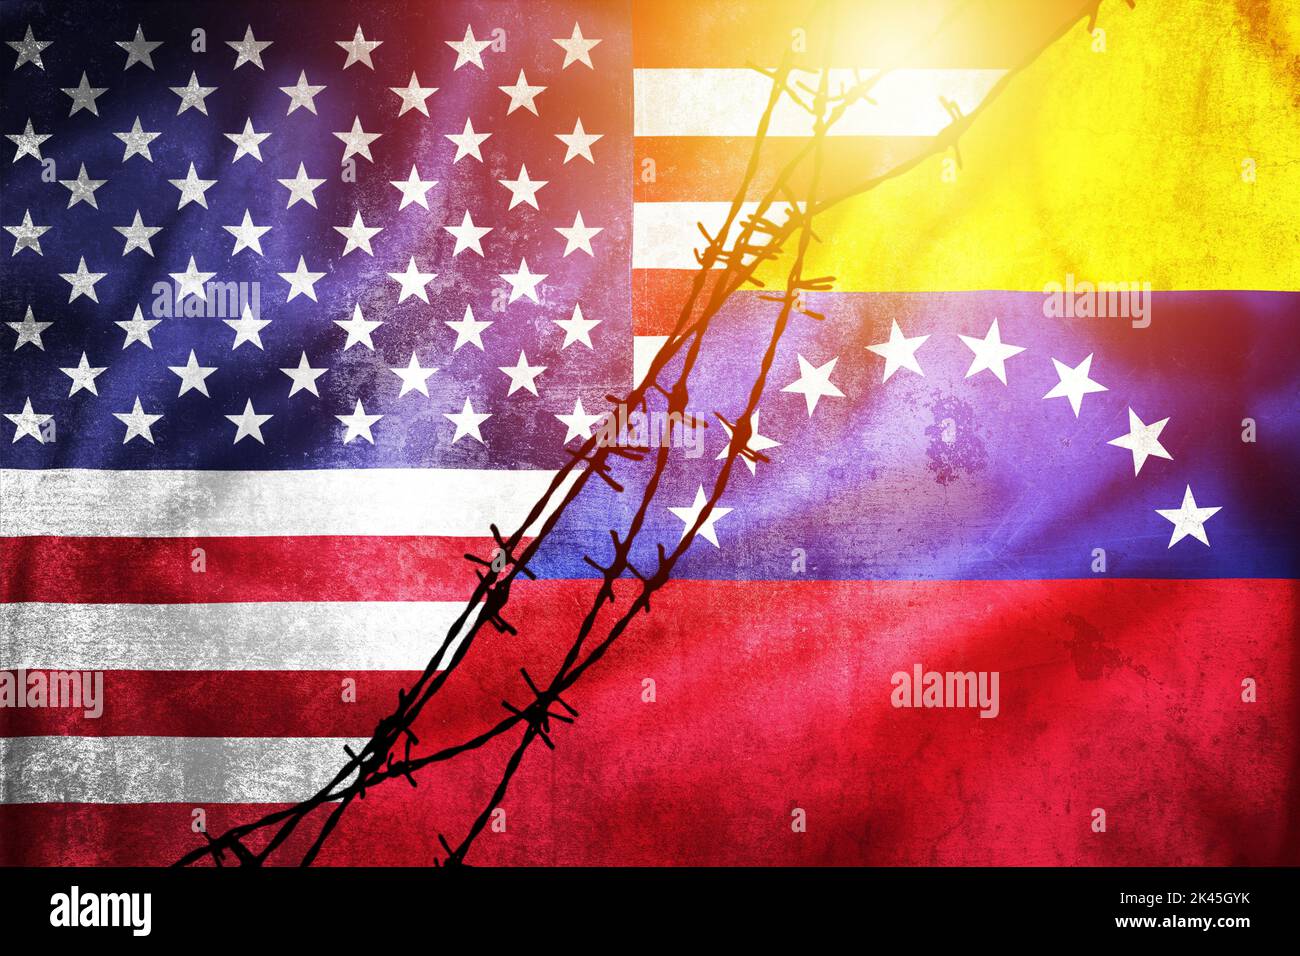 Grunge flags of USA and Venezuela divided by barb wire sun haze illustration, concept of tense relations between USA and Venezuela Stock Photo